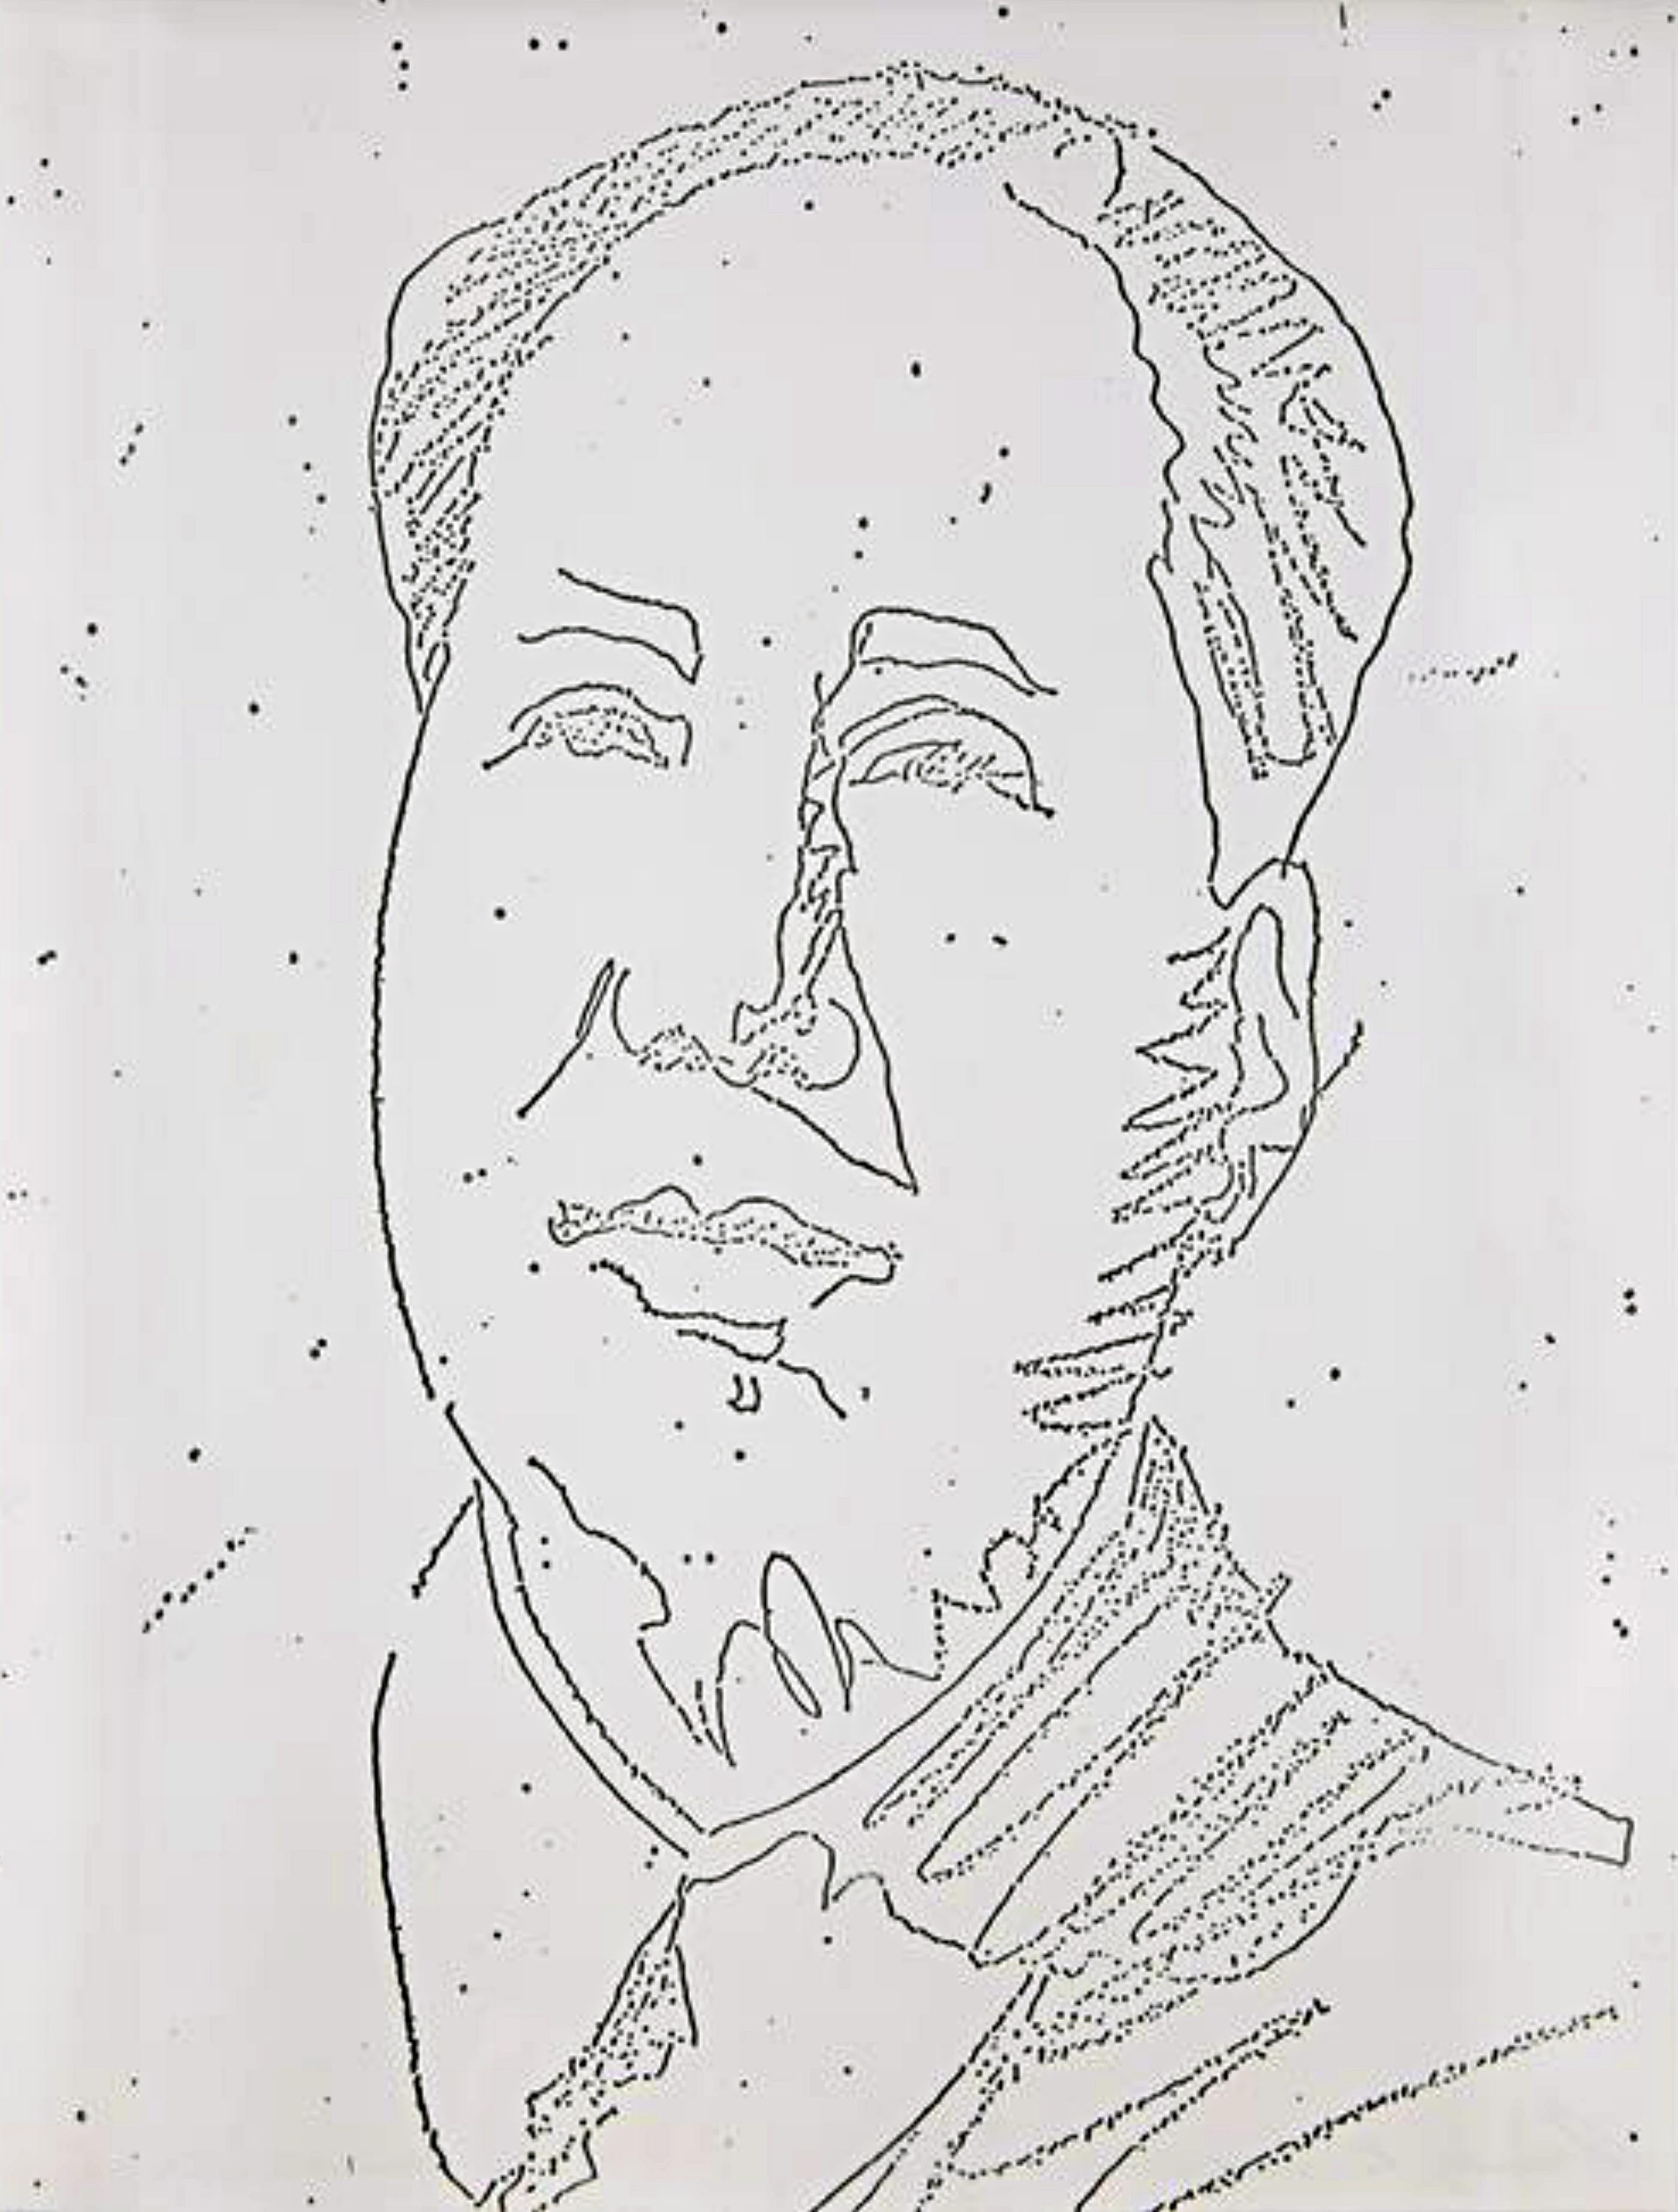 Mao. from the New York Collection for Stockholm (F&S II. 89)